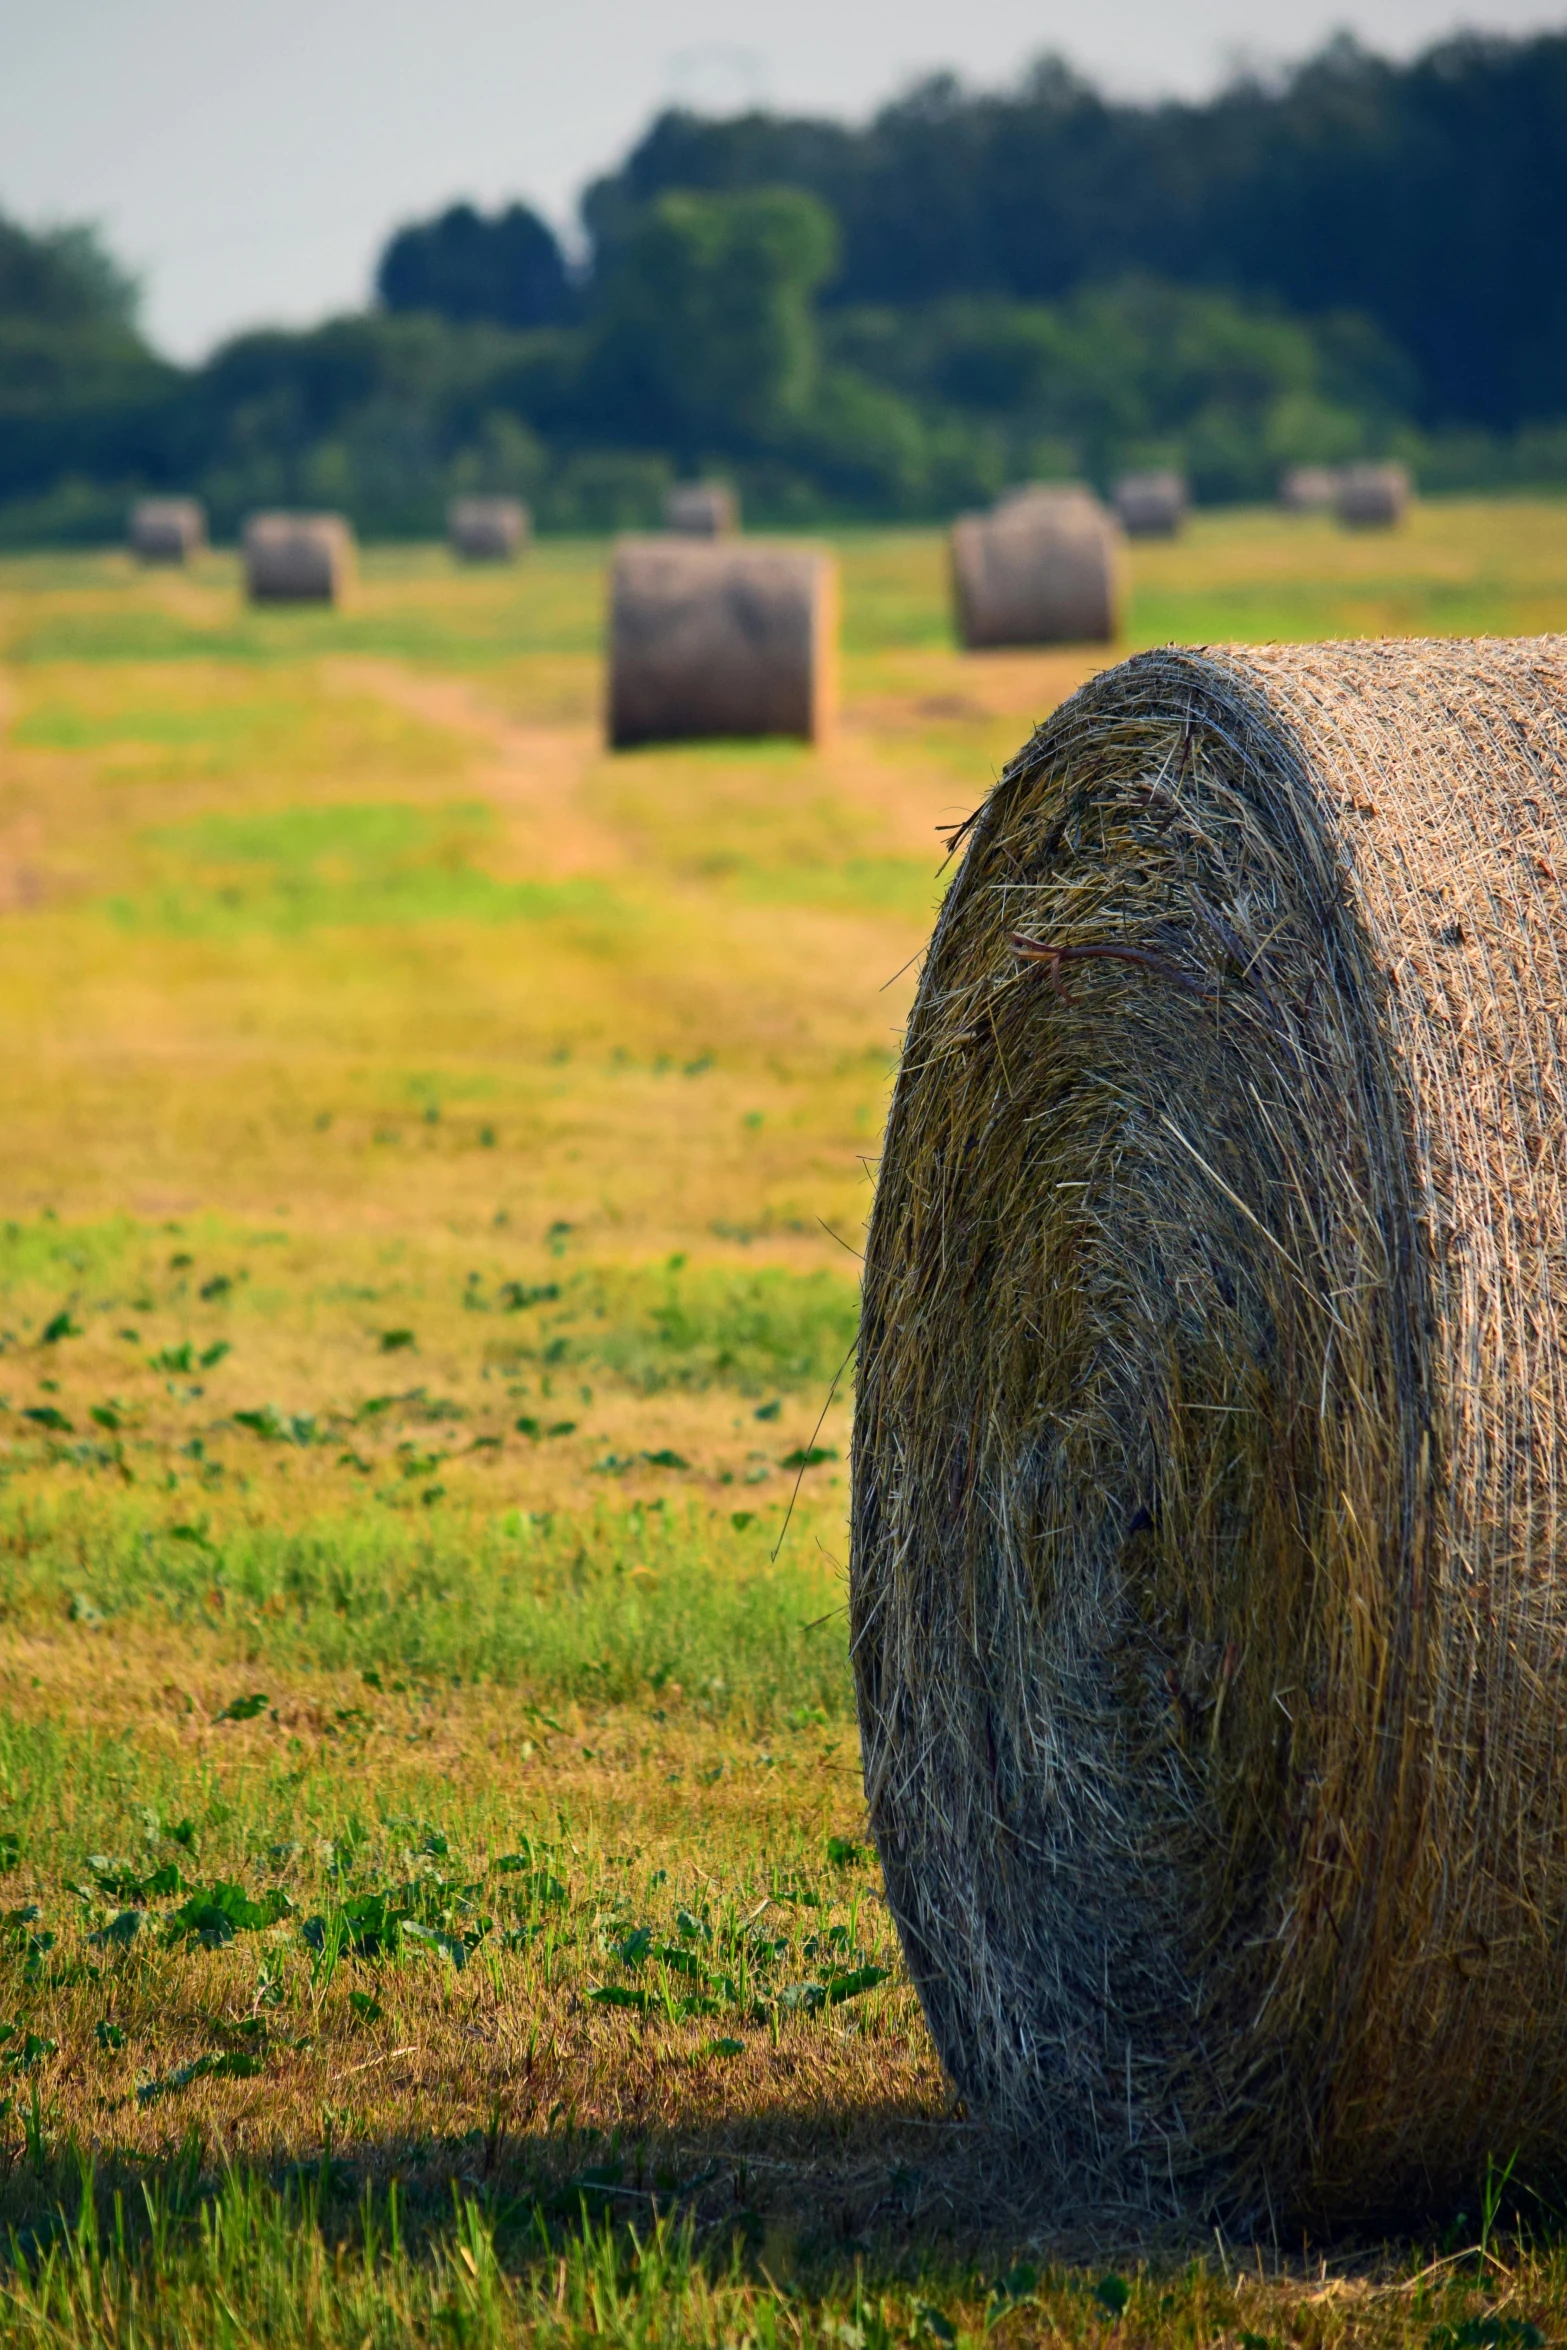 hay bales in a field with trees in the background, a picture, shutterstock contest winner, 2 5 6 x 2 5 6 pixels, oklahoma, panoramic, circle